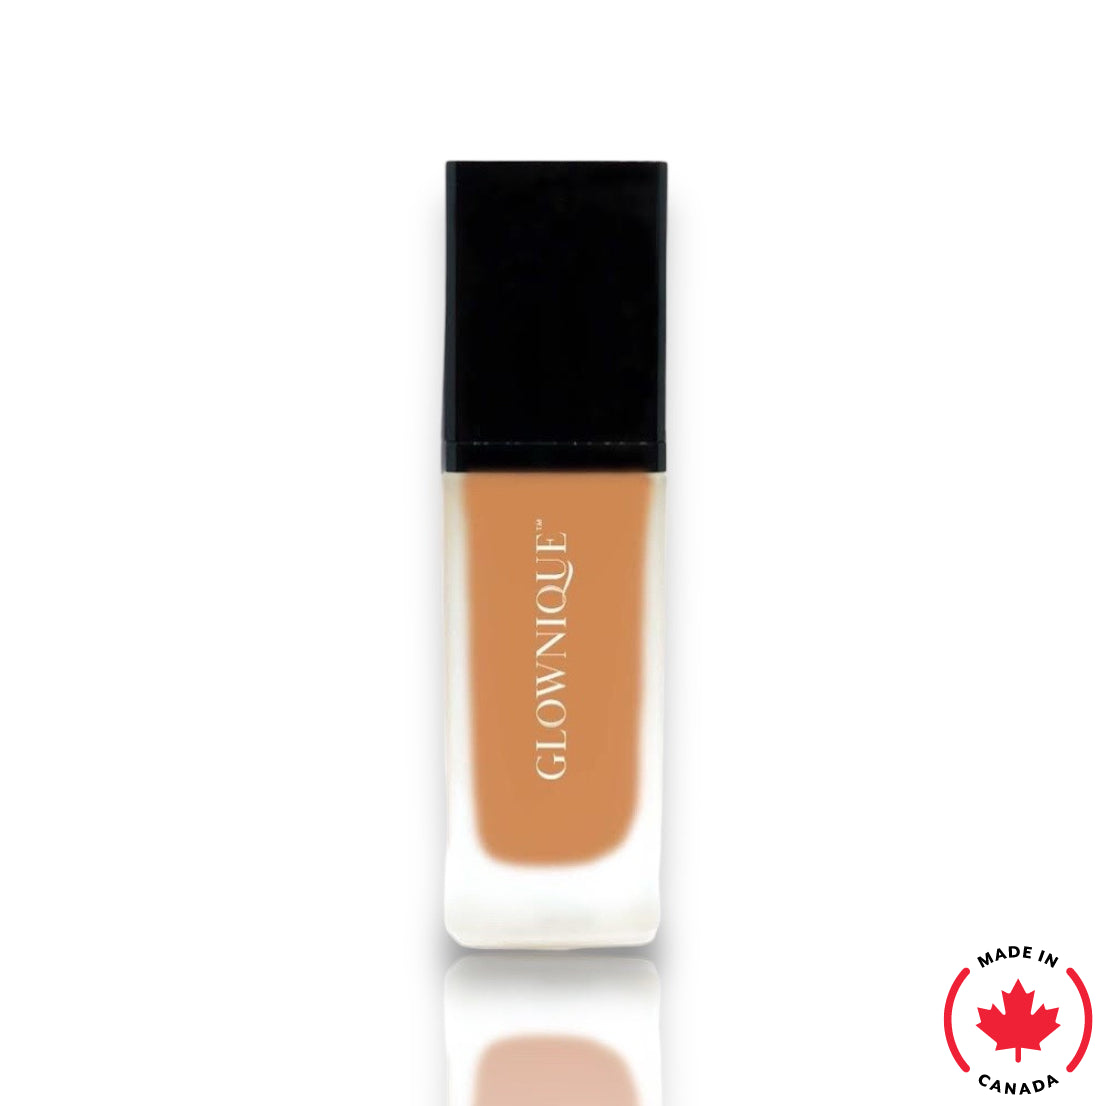 Foundation with SPF - Marigold | GLOWNIQUE